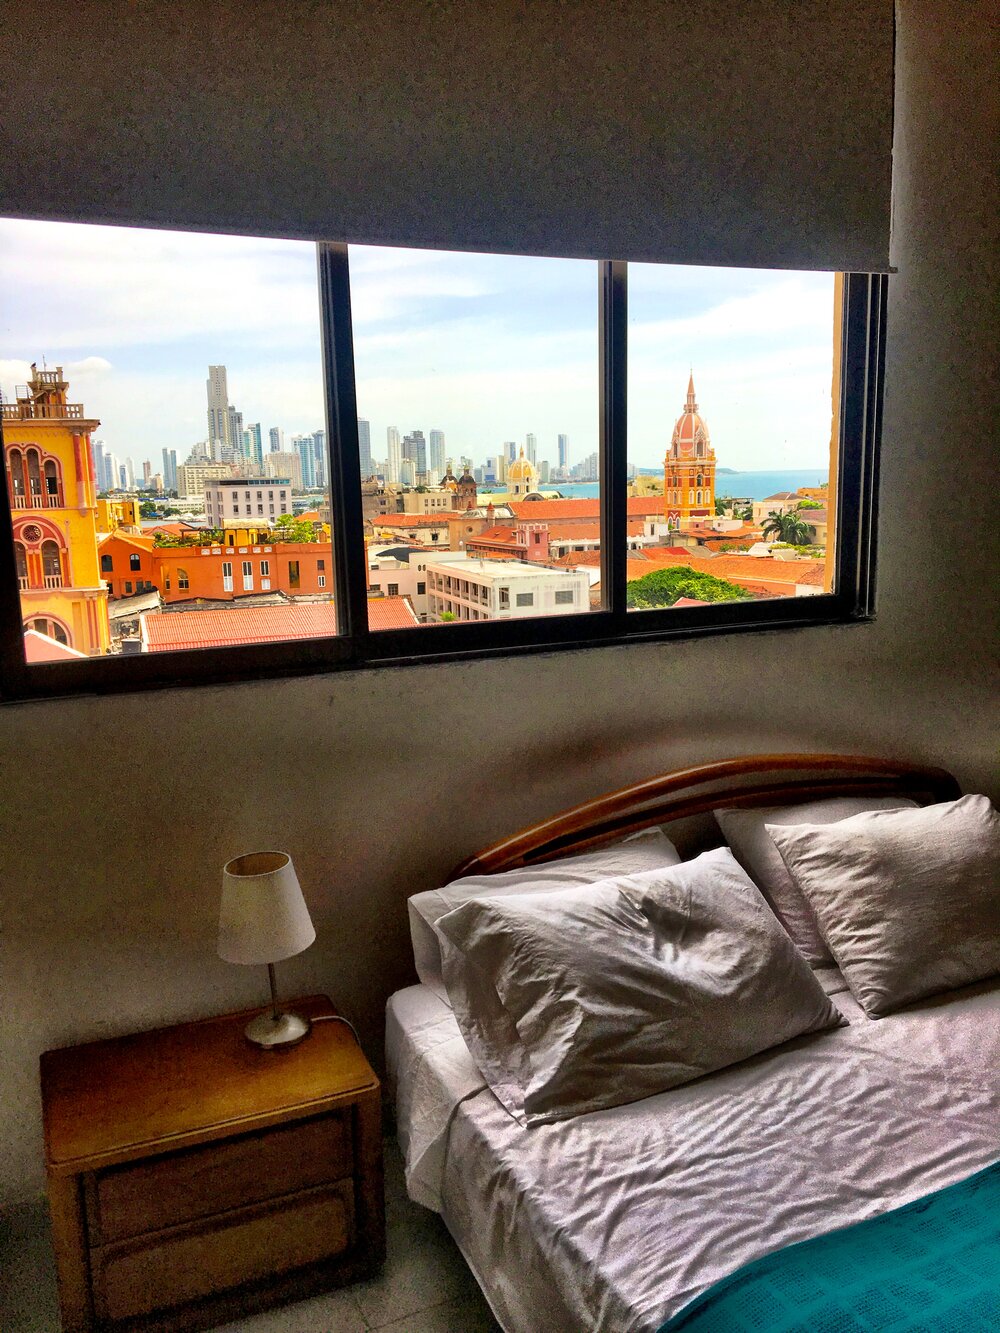 Bed and nightstand with a view from the window overlooking a city skyline